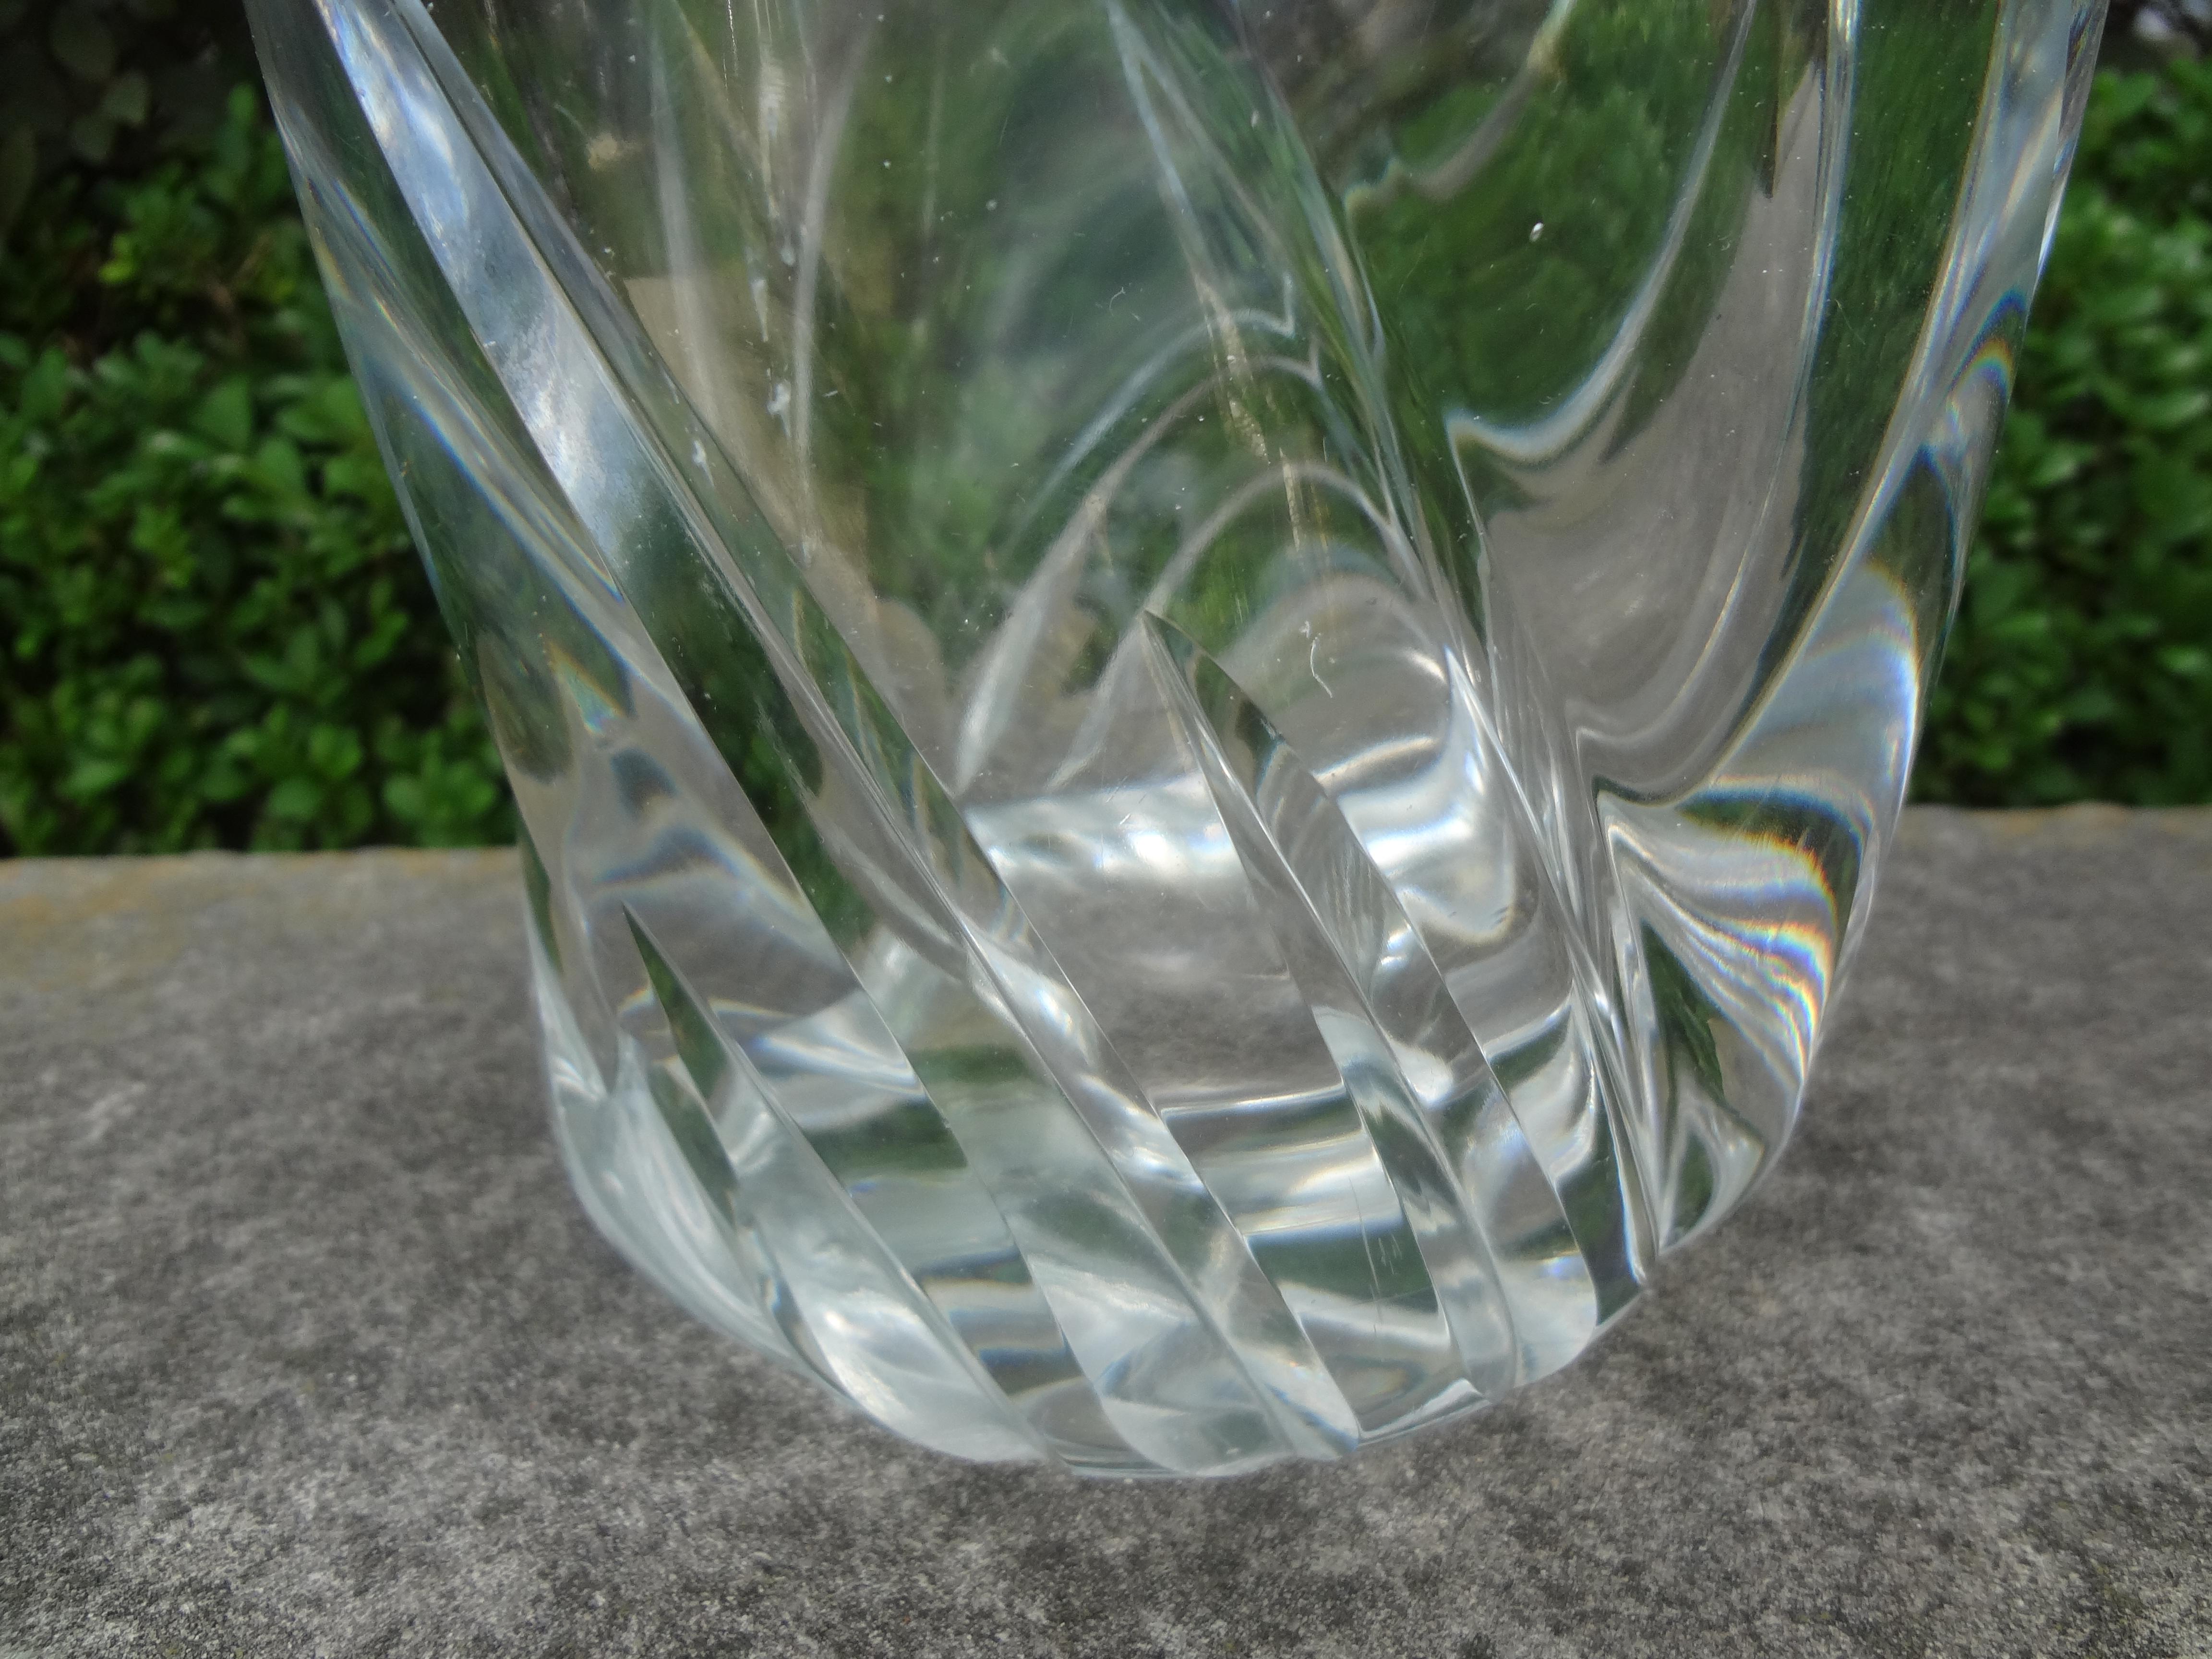 Stunning large French clear crystal vase by Daum, circa 1945-1950.
Our large-scale shimmering crystal wide mouthed vase tapers to the base with an acid etched signature 